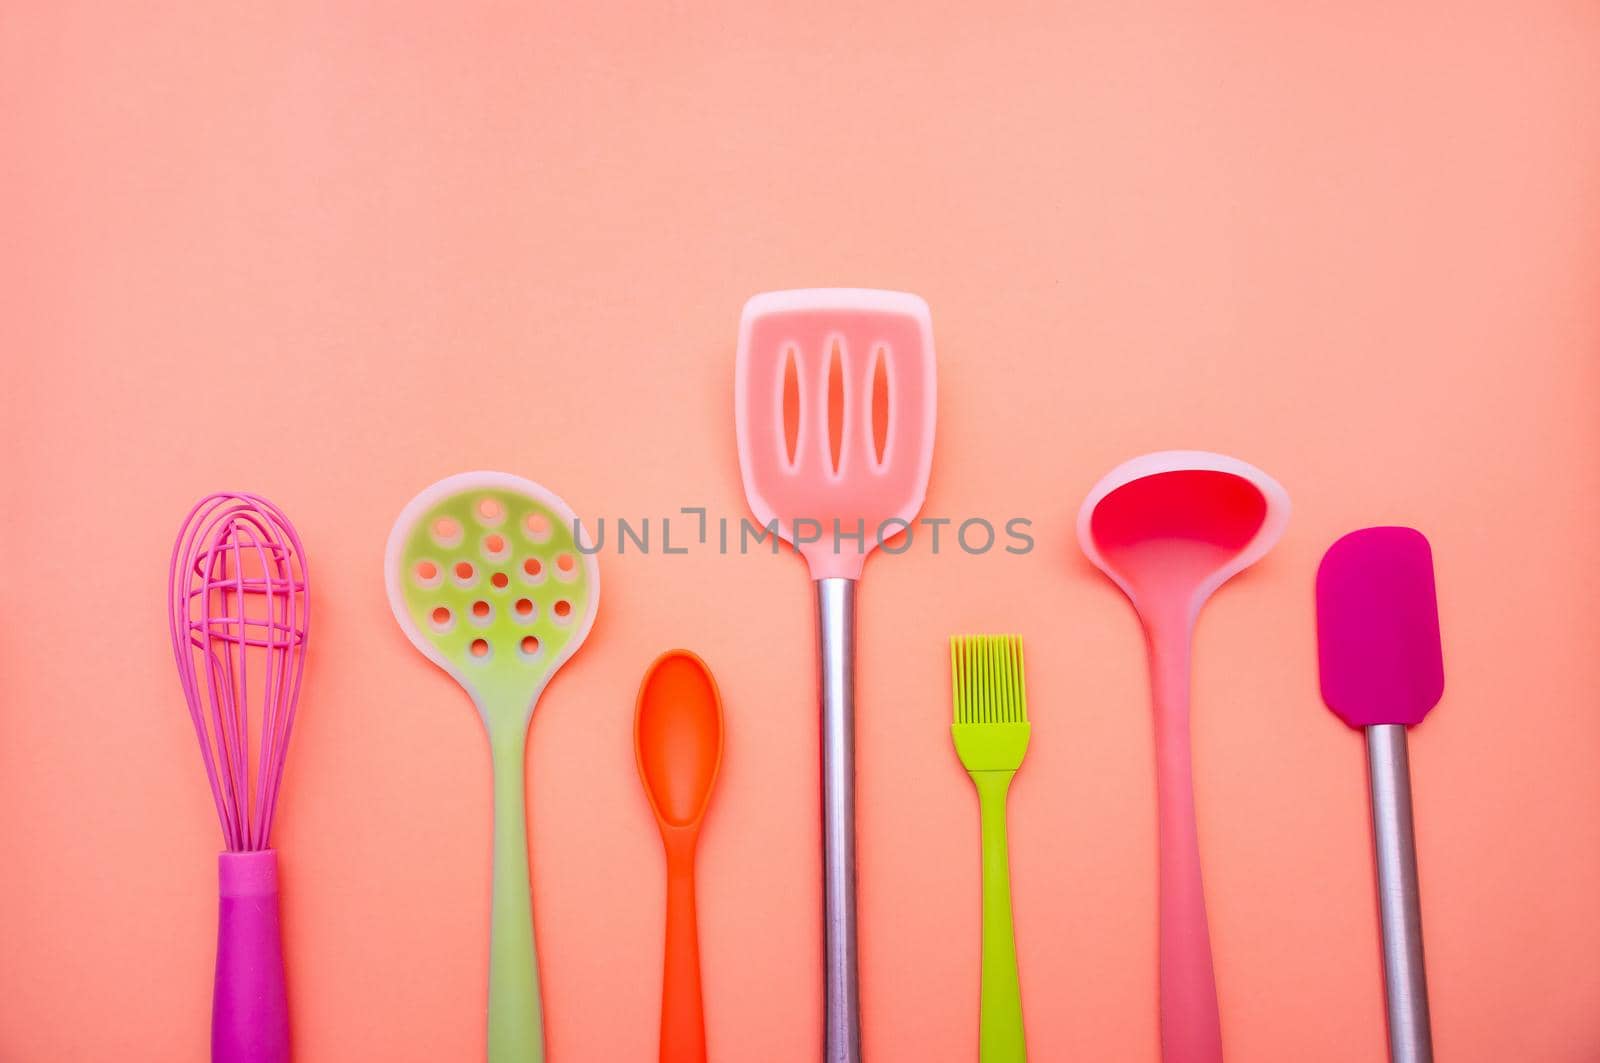 Various Colored Silicone Kitchen Utensils on Coral Background. Copy Space For Your Text.